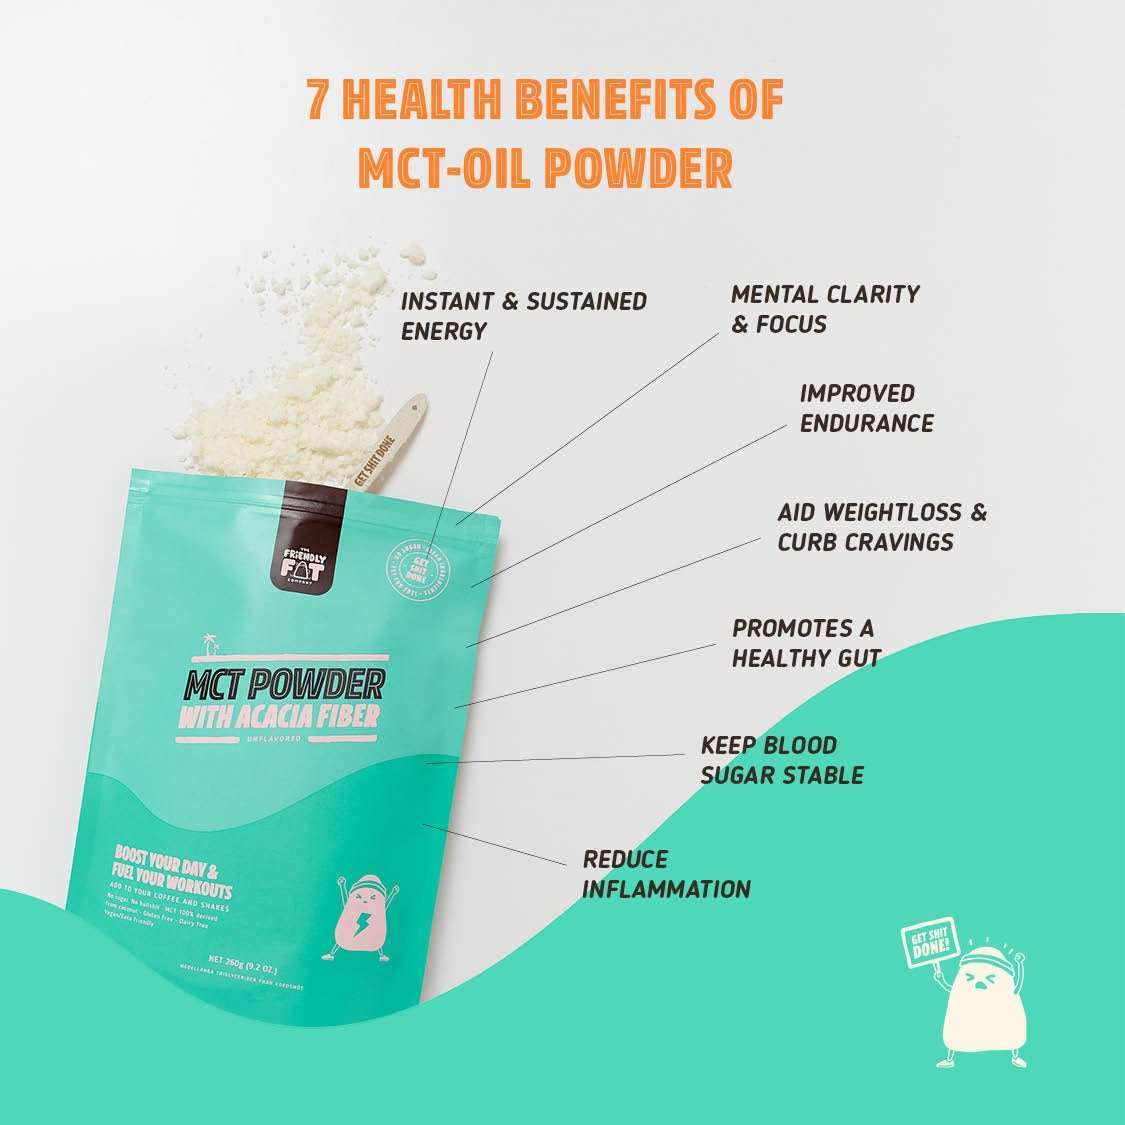 The Friendly Fat Company C8 MCT-Powder Unflavored